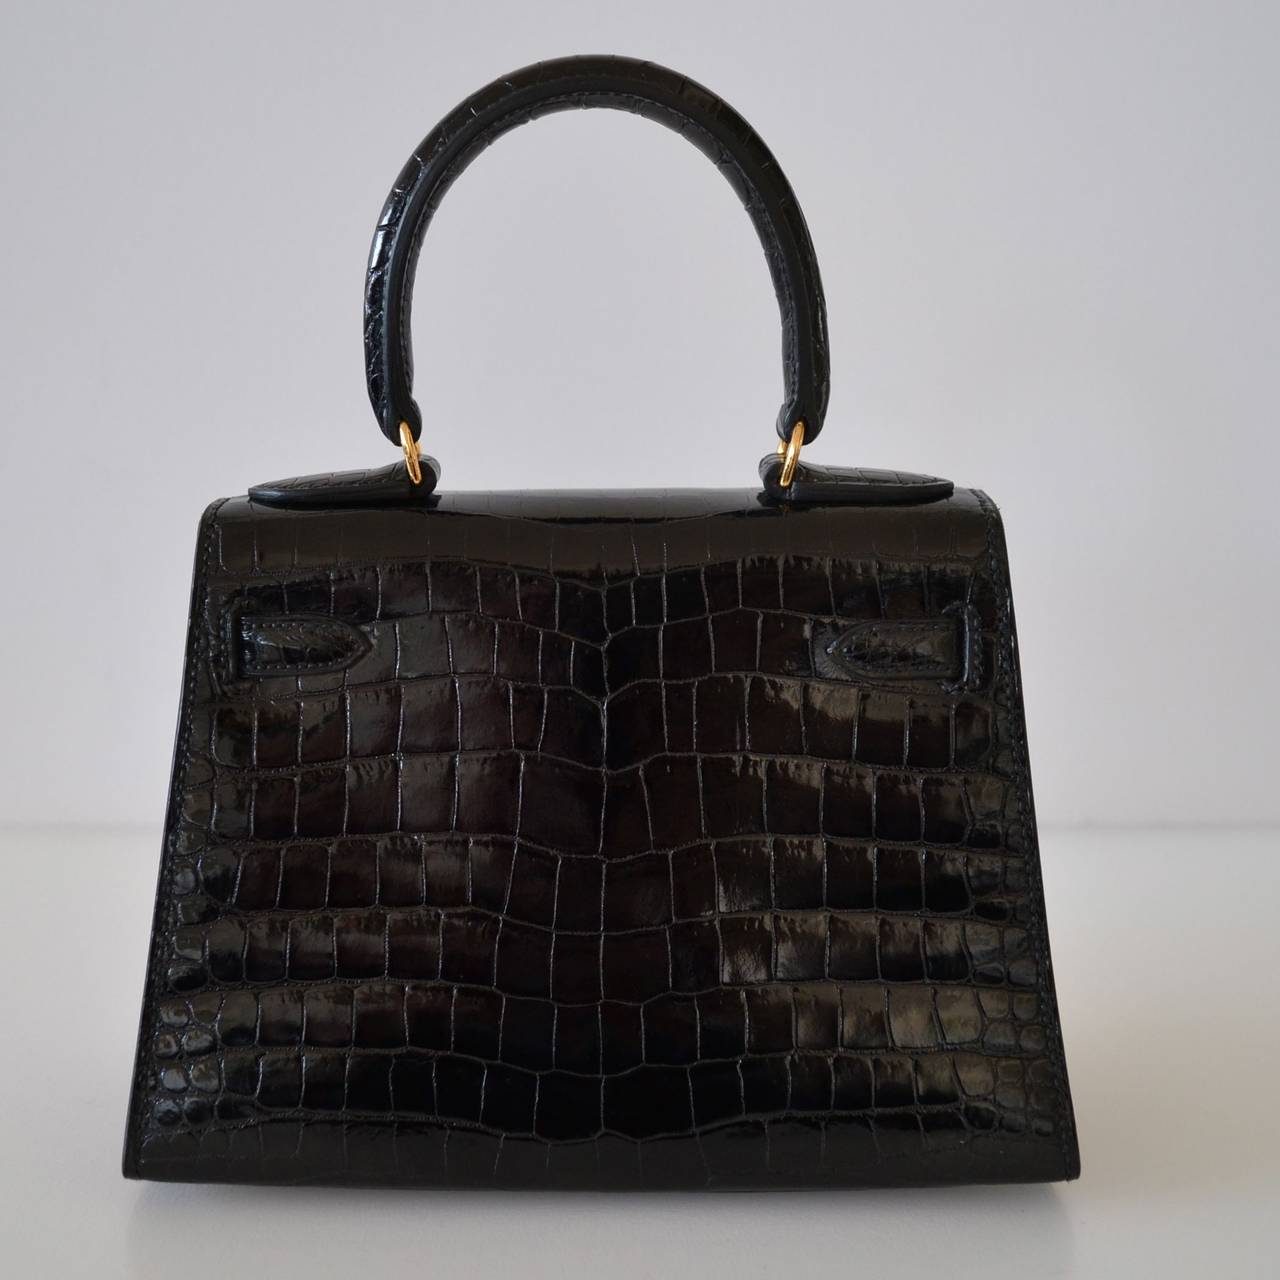 Hermès Kelly 20 Crocodile Porosus
Rare Size
Crocodile Porosus skin
Black shiny color
Golden plated hardware
 
Hermès Paris Made In France marking + ^ symbol
Stamp M in round
 
Excellent condition (8/10)
Corners and handle are as